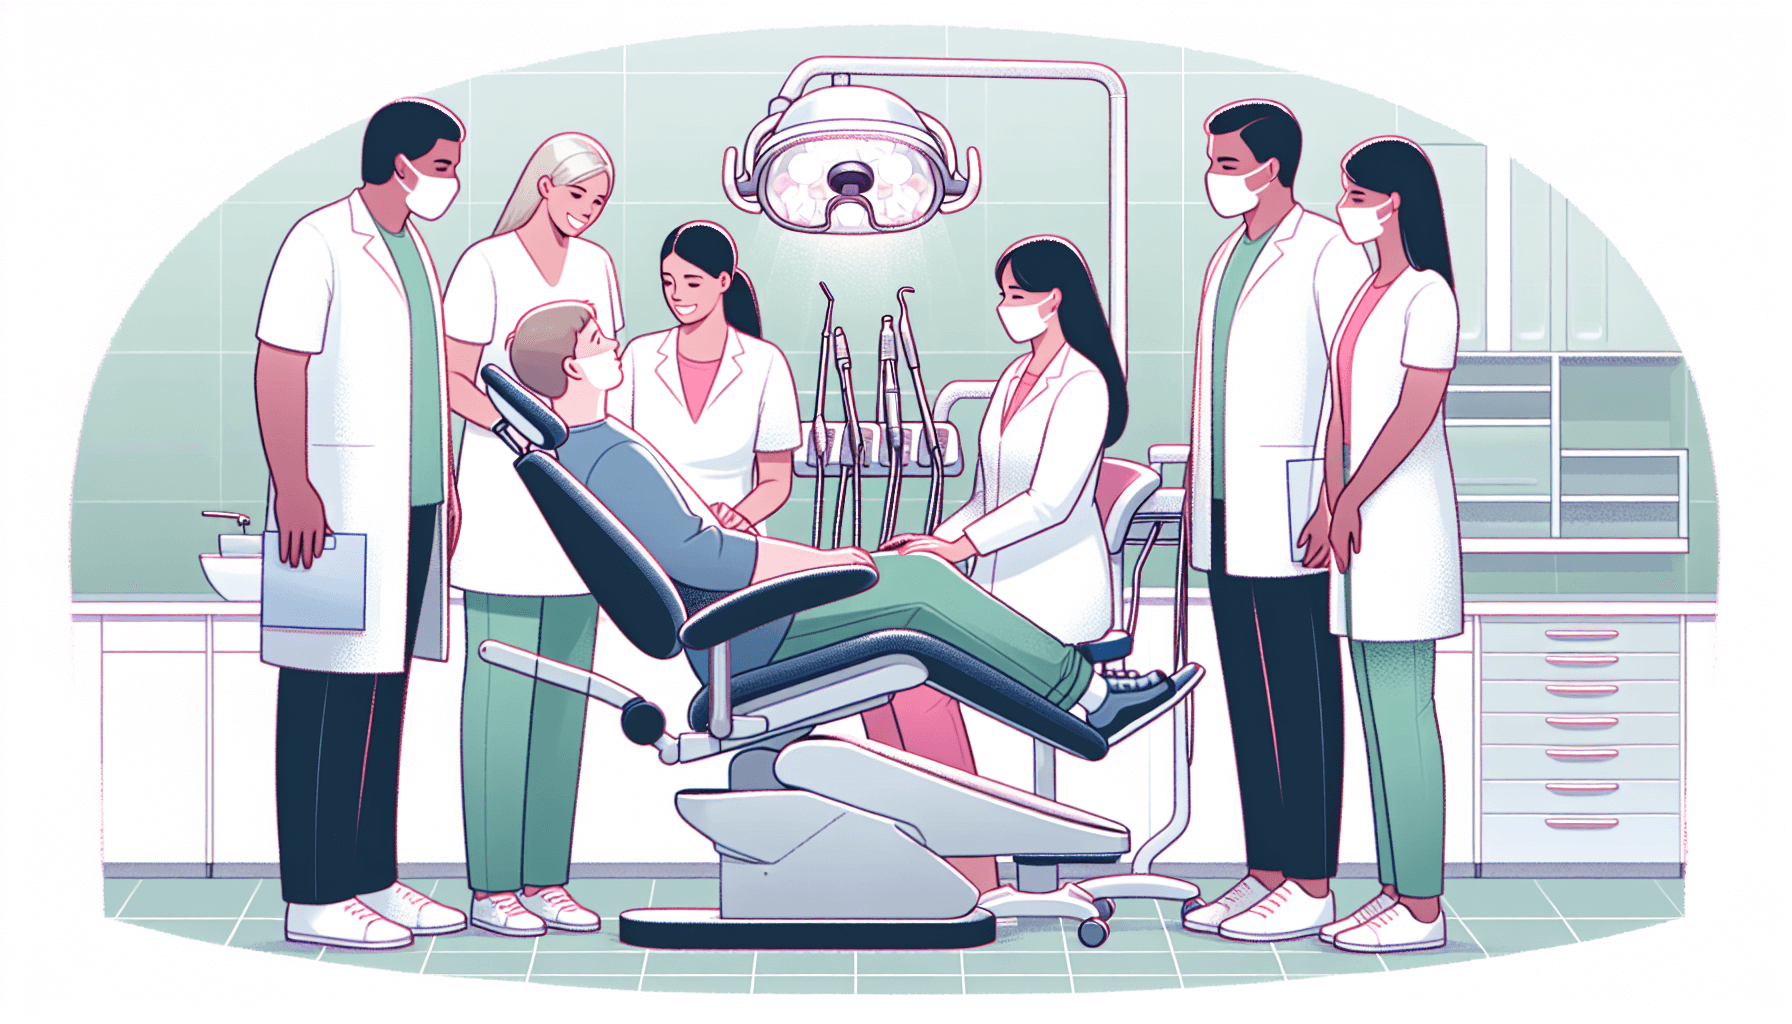 Illustration of a special needs dentist collaborating with caregivers and healthcare providers